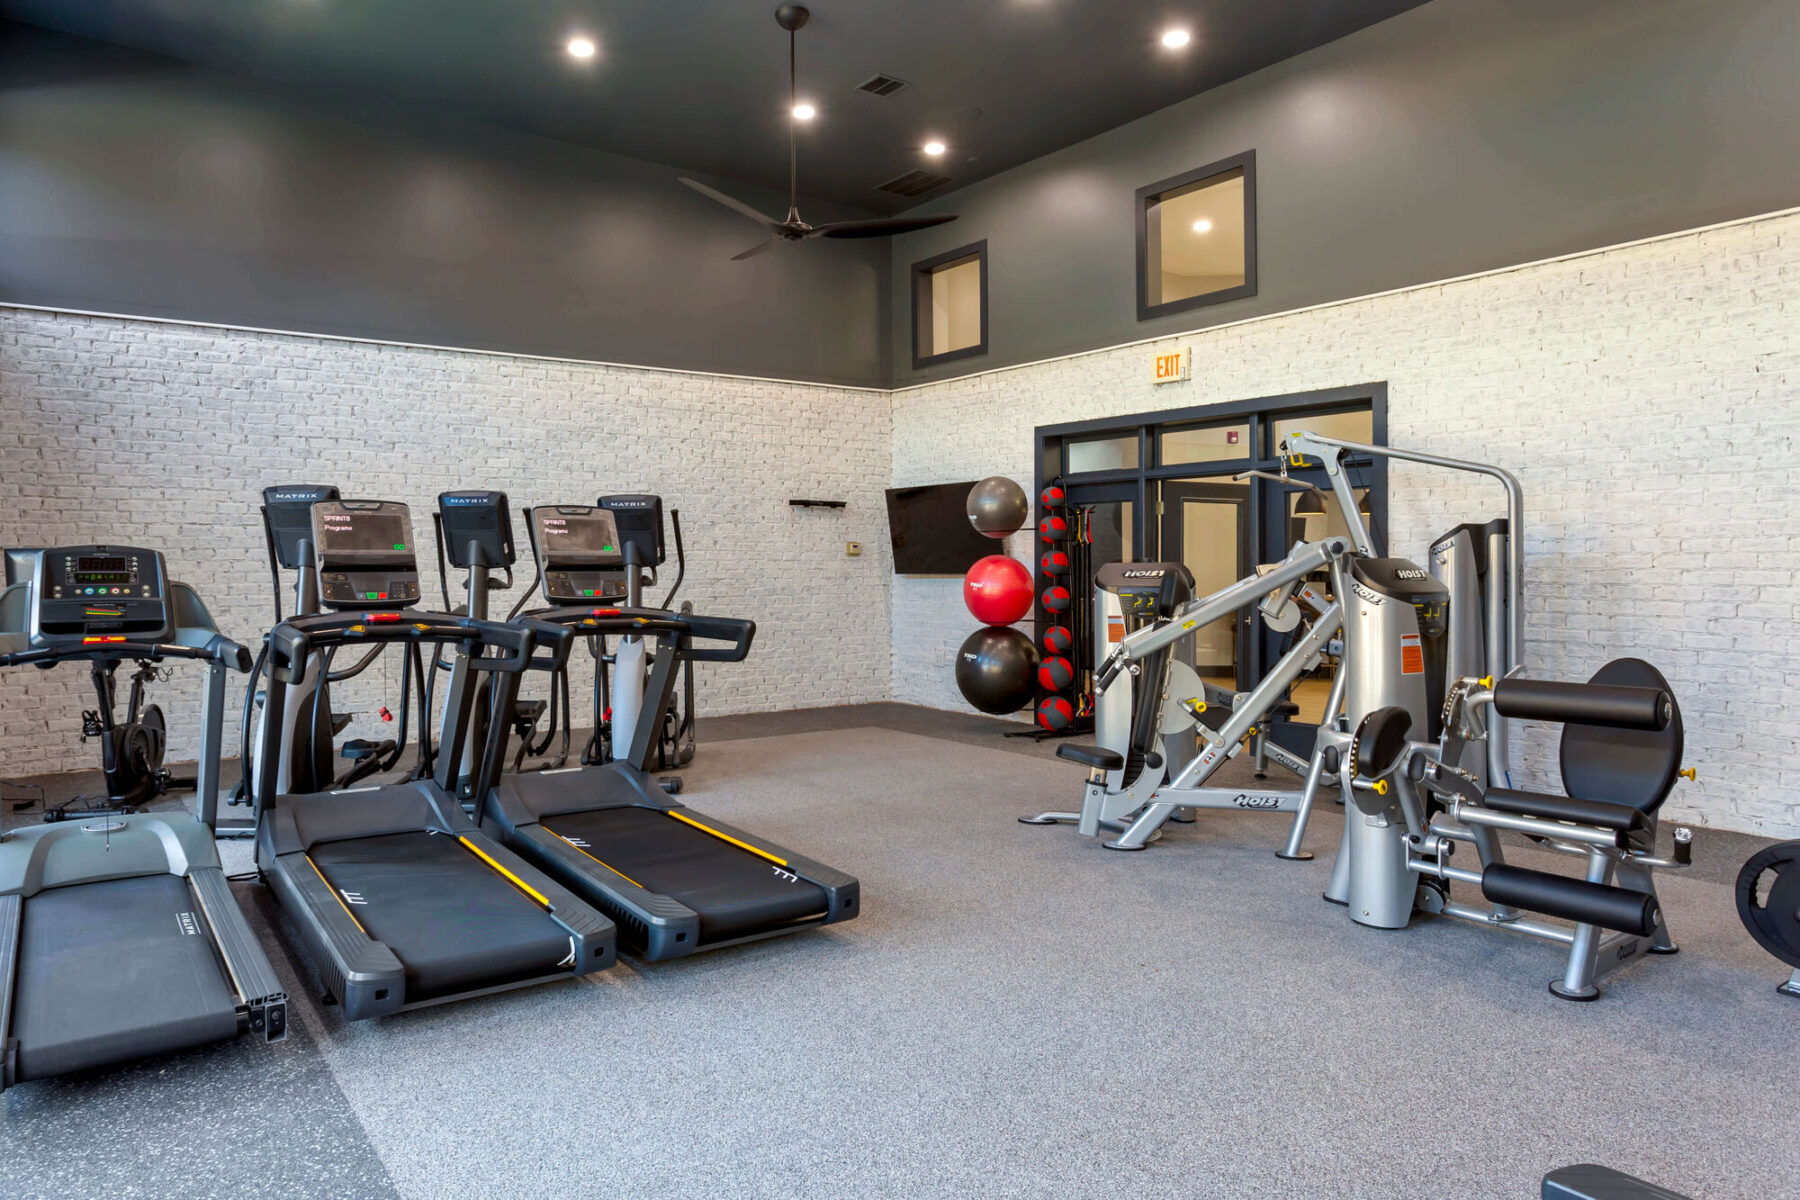 Fitness center with cardio and strength training machines